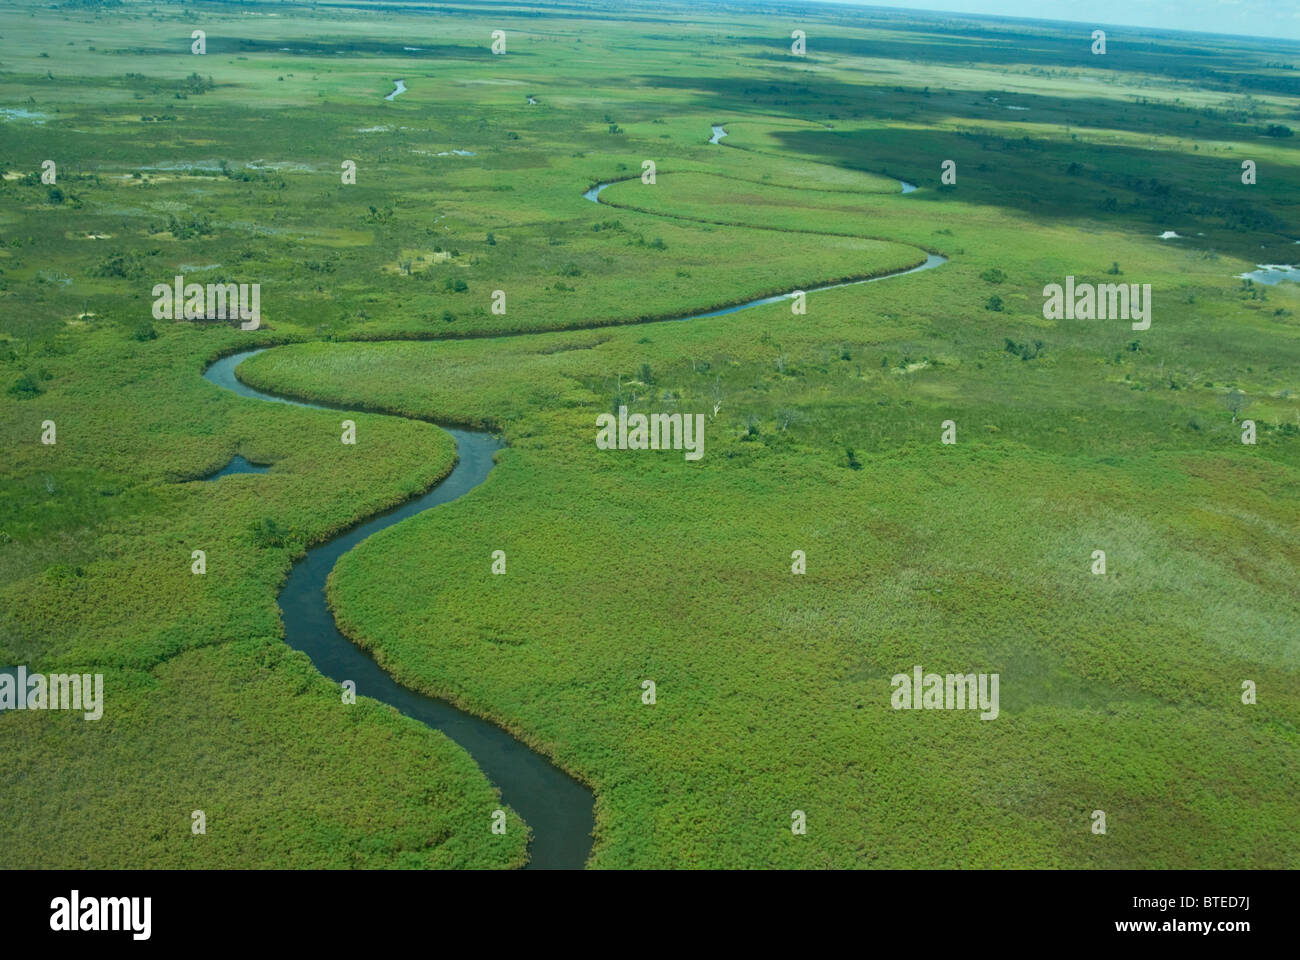 Aerial scenic view of a meandering channel flanked by papyrus reed beds Stock Photo